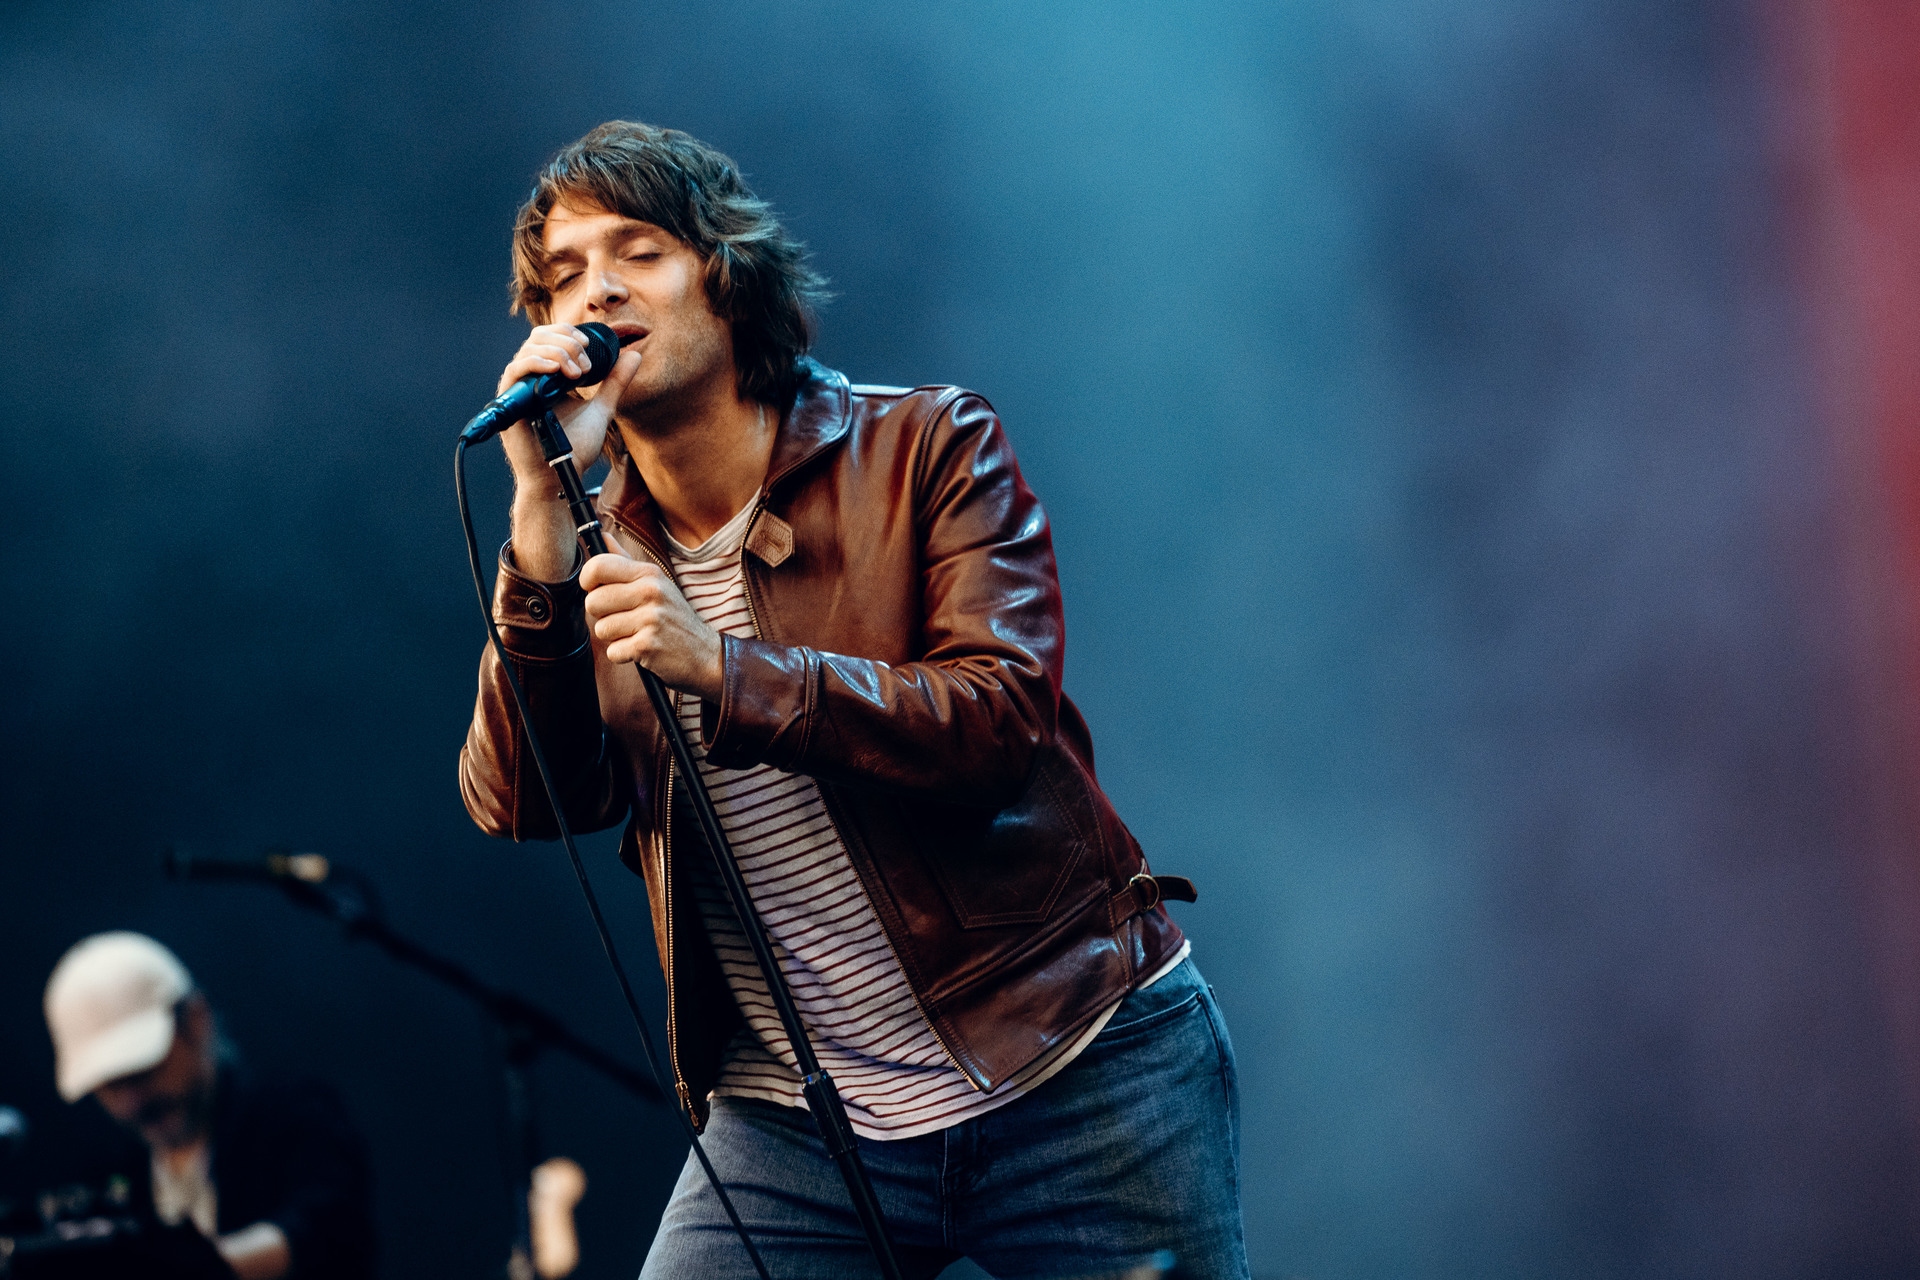 Paolo Nutini headlined the main stage at TRNSMT on Friday. (Image: TRNSMT)